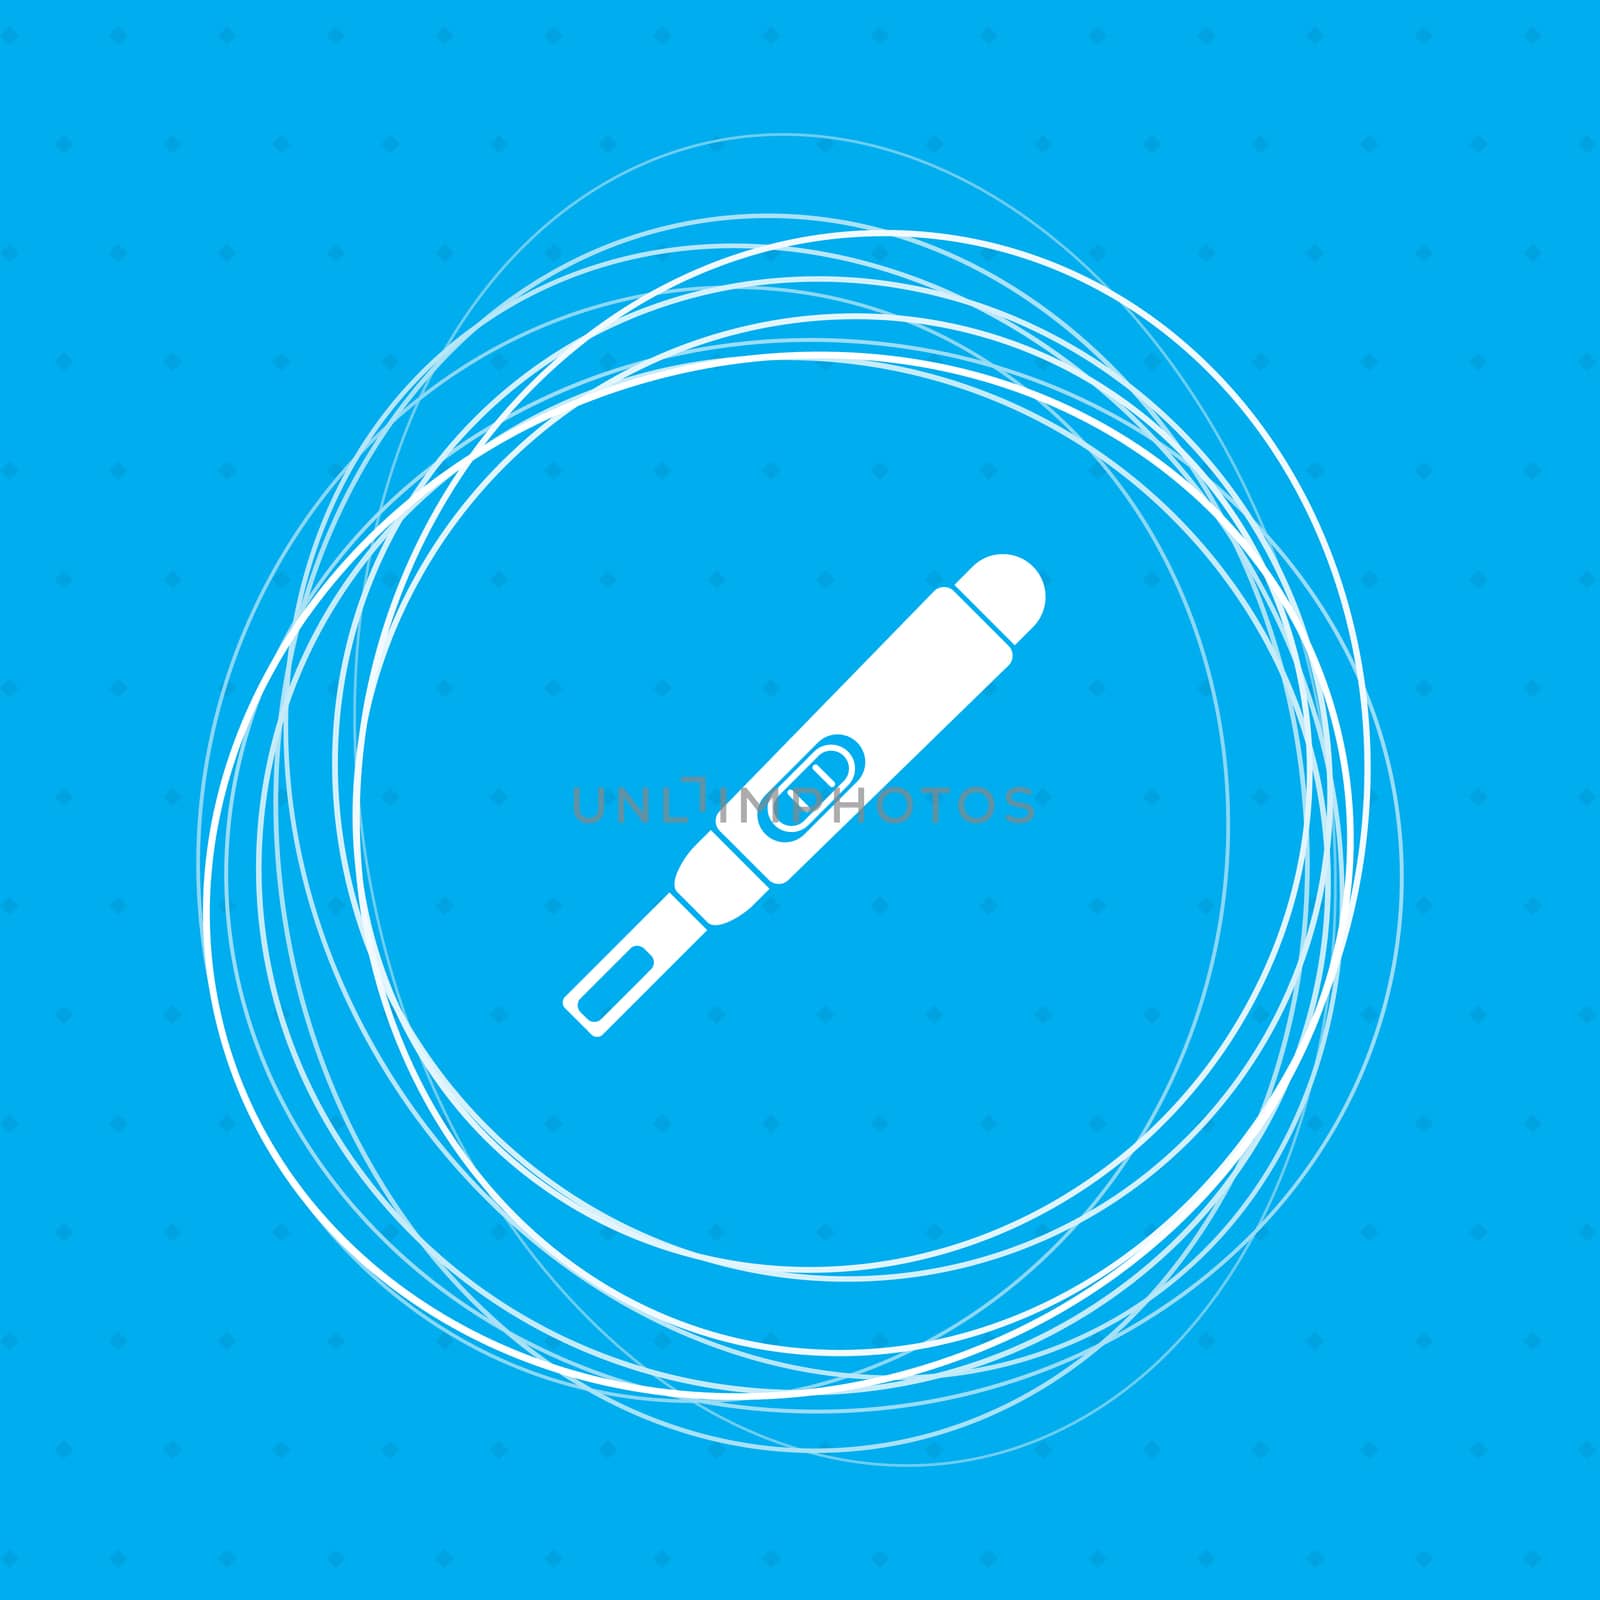 Pregnancy test icon on a blue background with abstract circles around and place for your text.  by Adamchuk